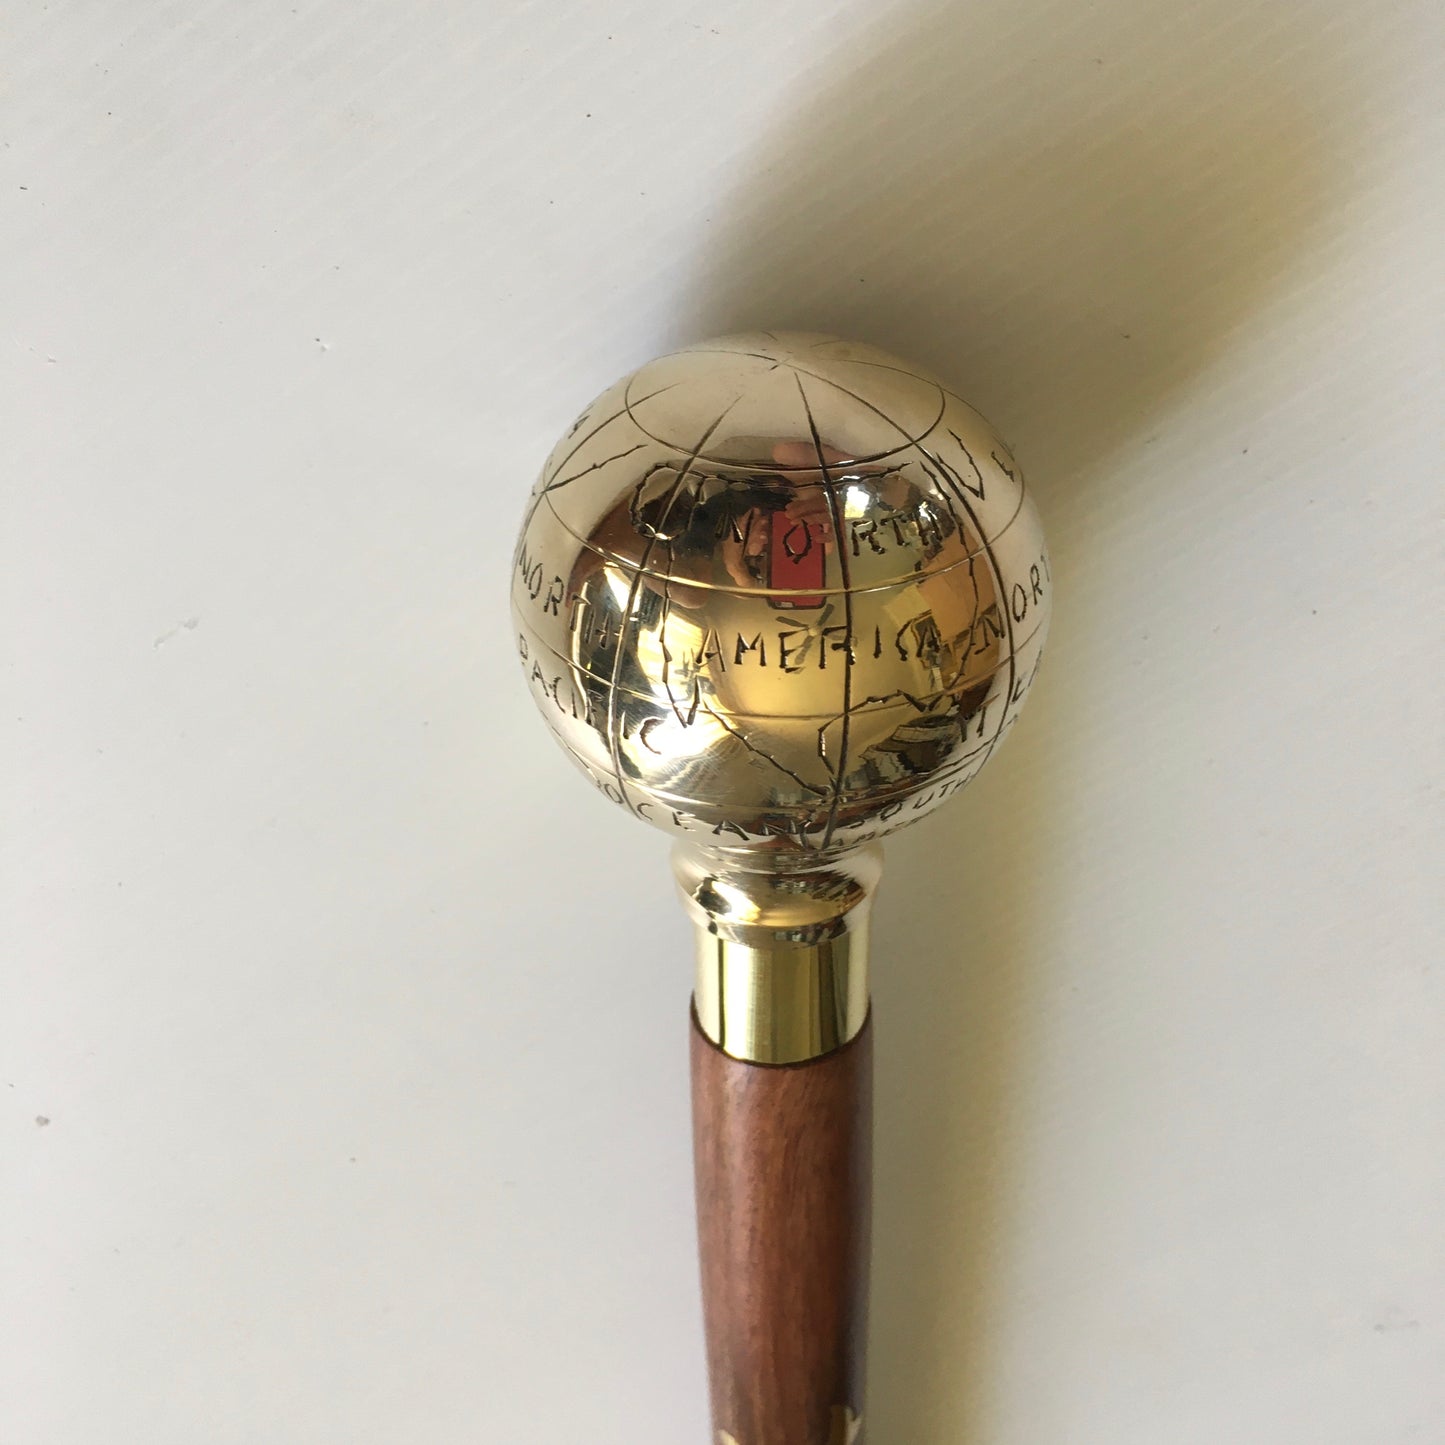 Walking Stick with Shiny Brass Globe Handle on a lovely brown stick with brass inlay